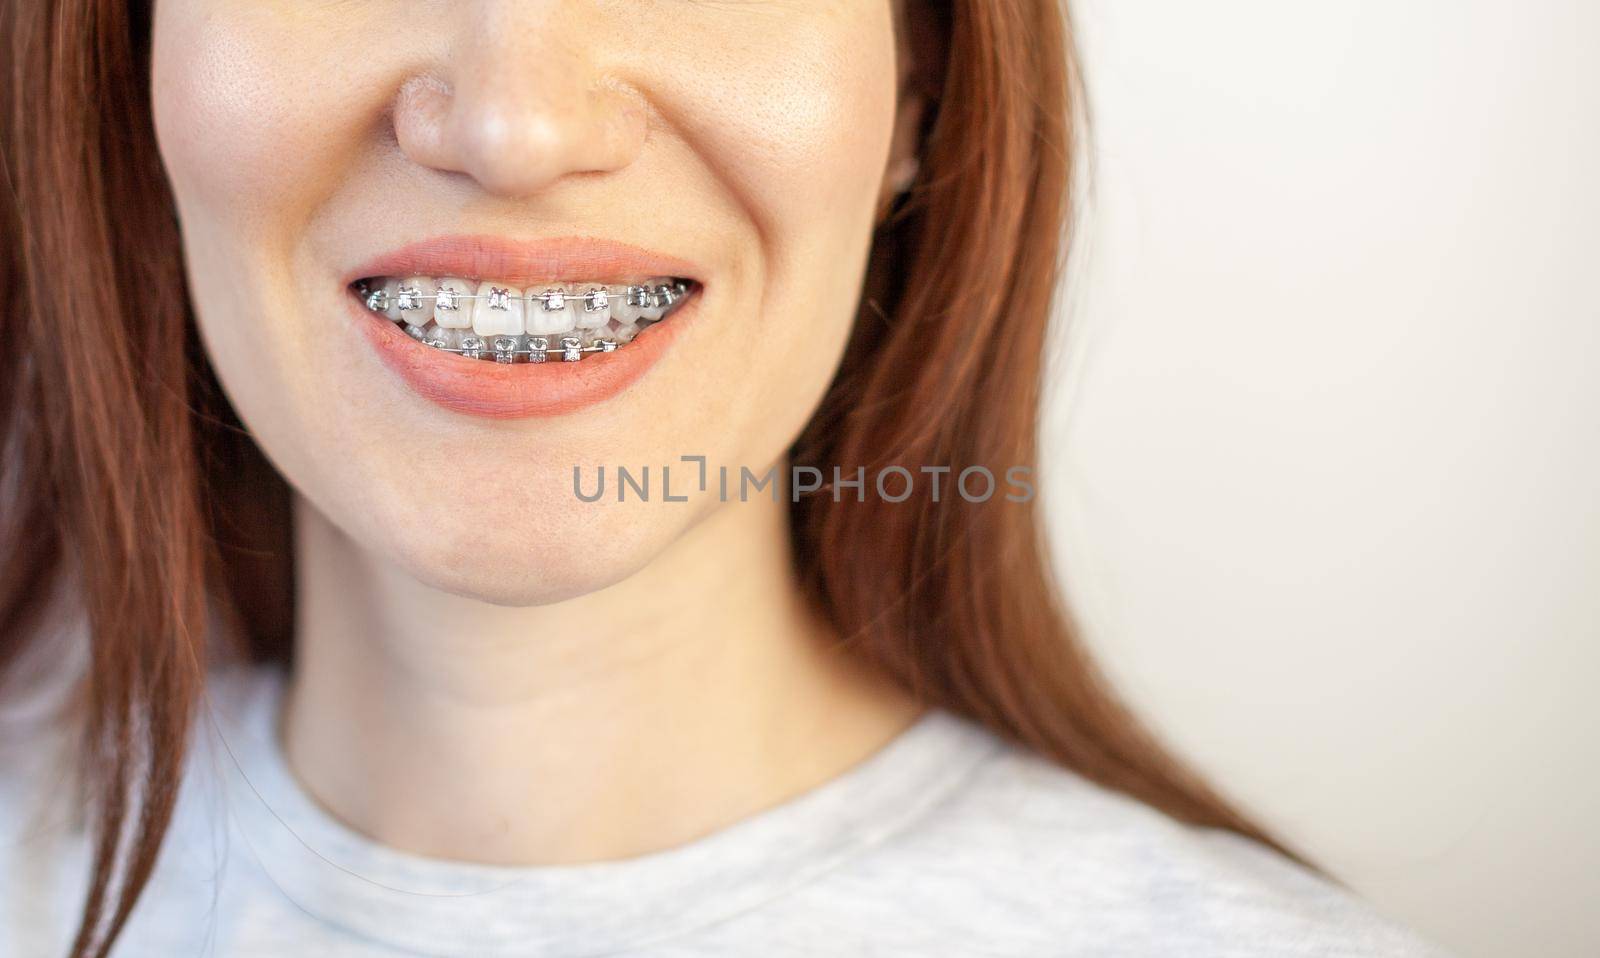 The smile of a young girl with braces on her white teeth. Teeth straightening. Malocclusion. Dental care.